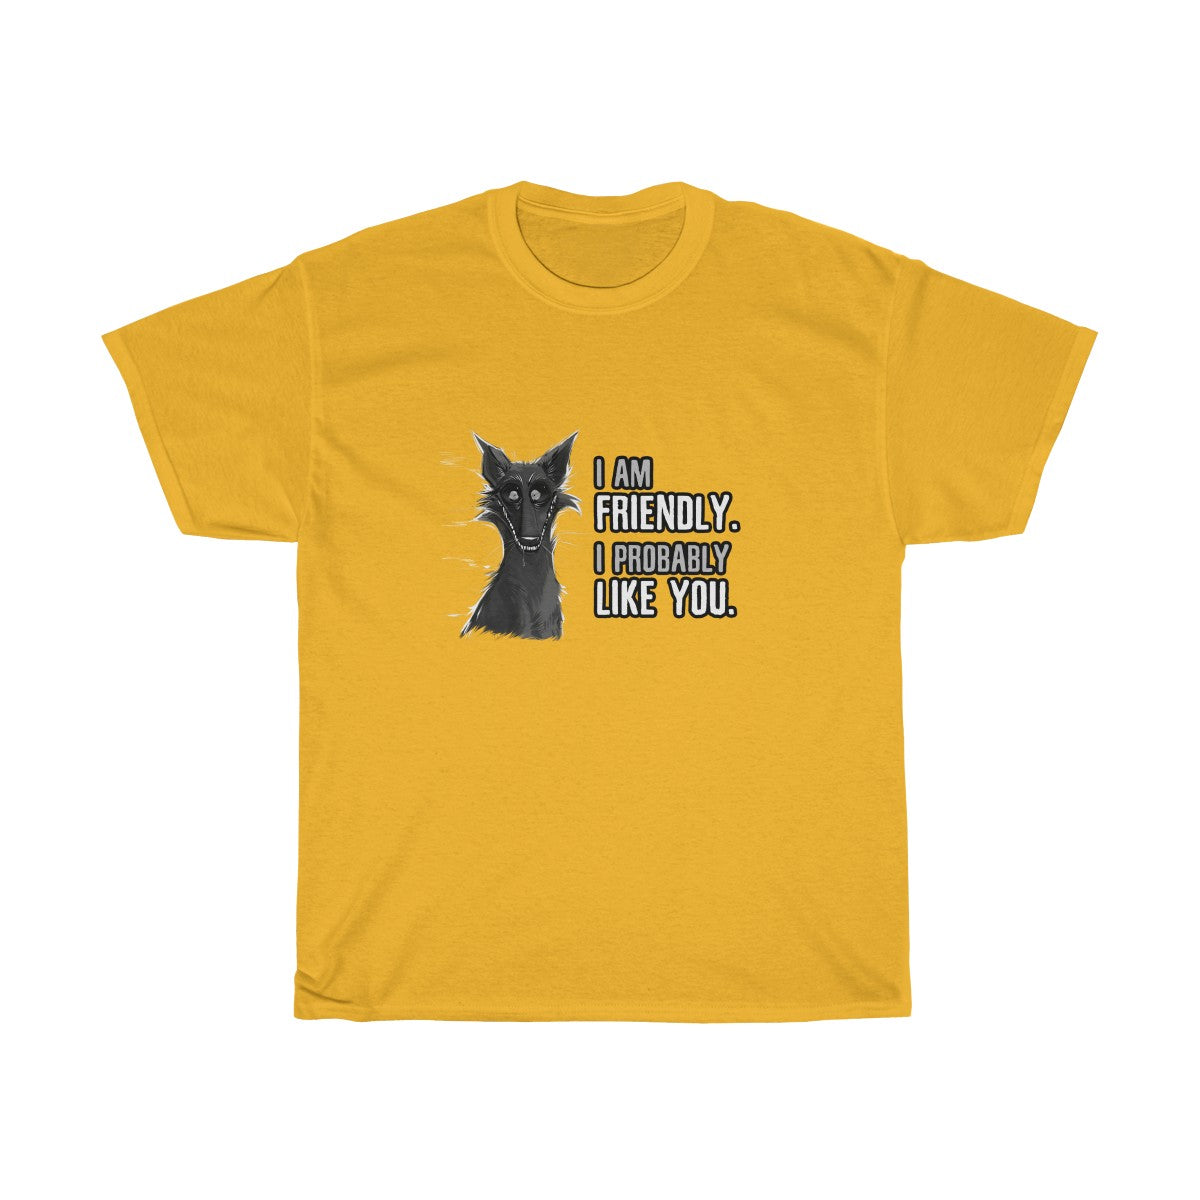 I probably DON'T hate you -T-Shirt T-Shirt Cyamallo Gold S 